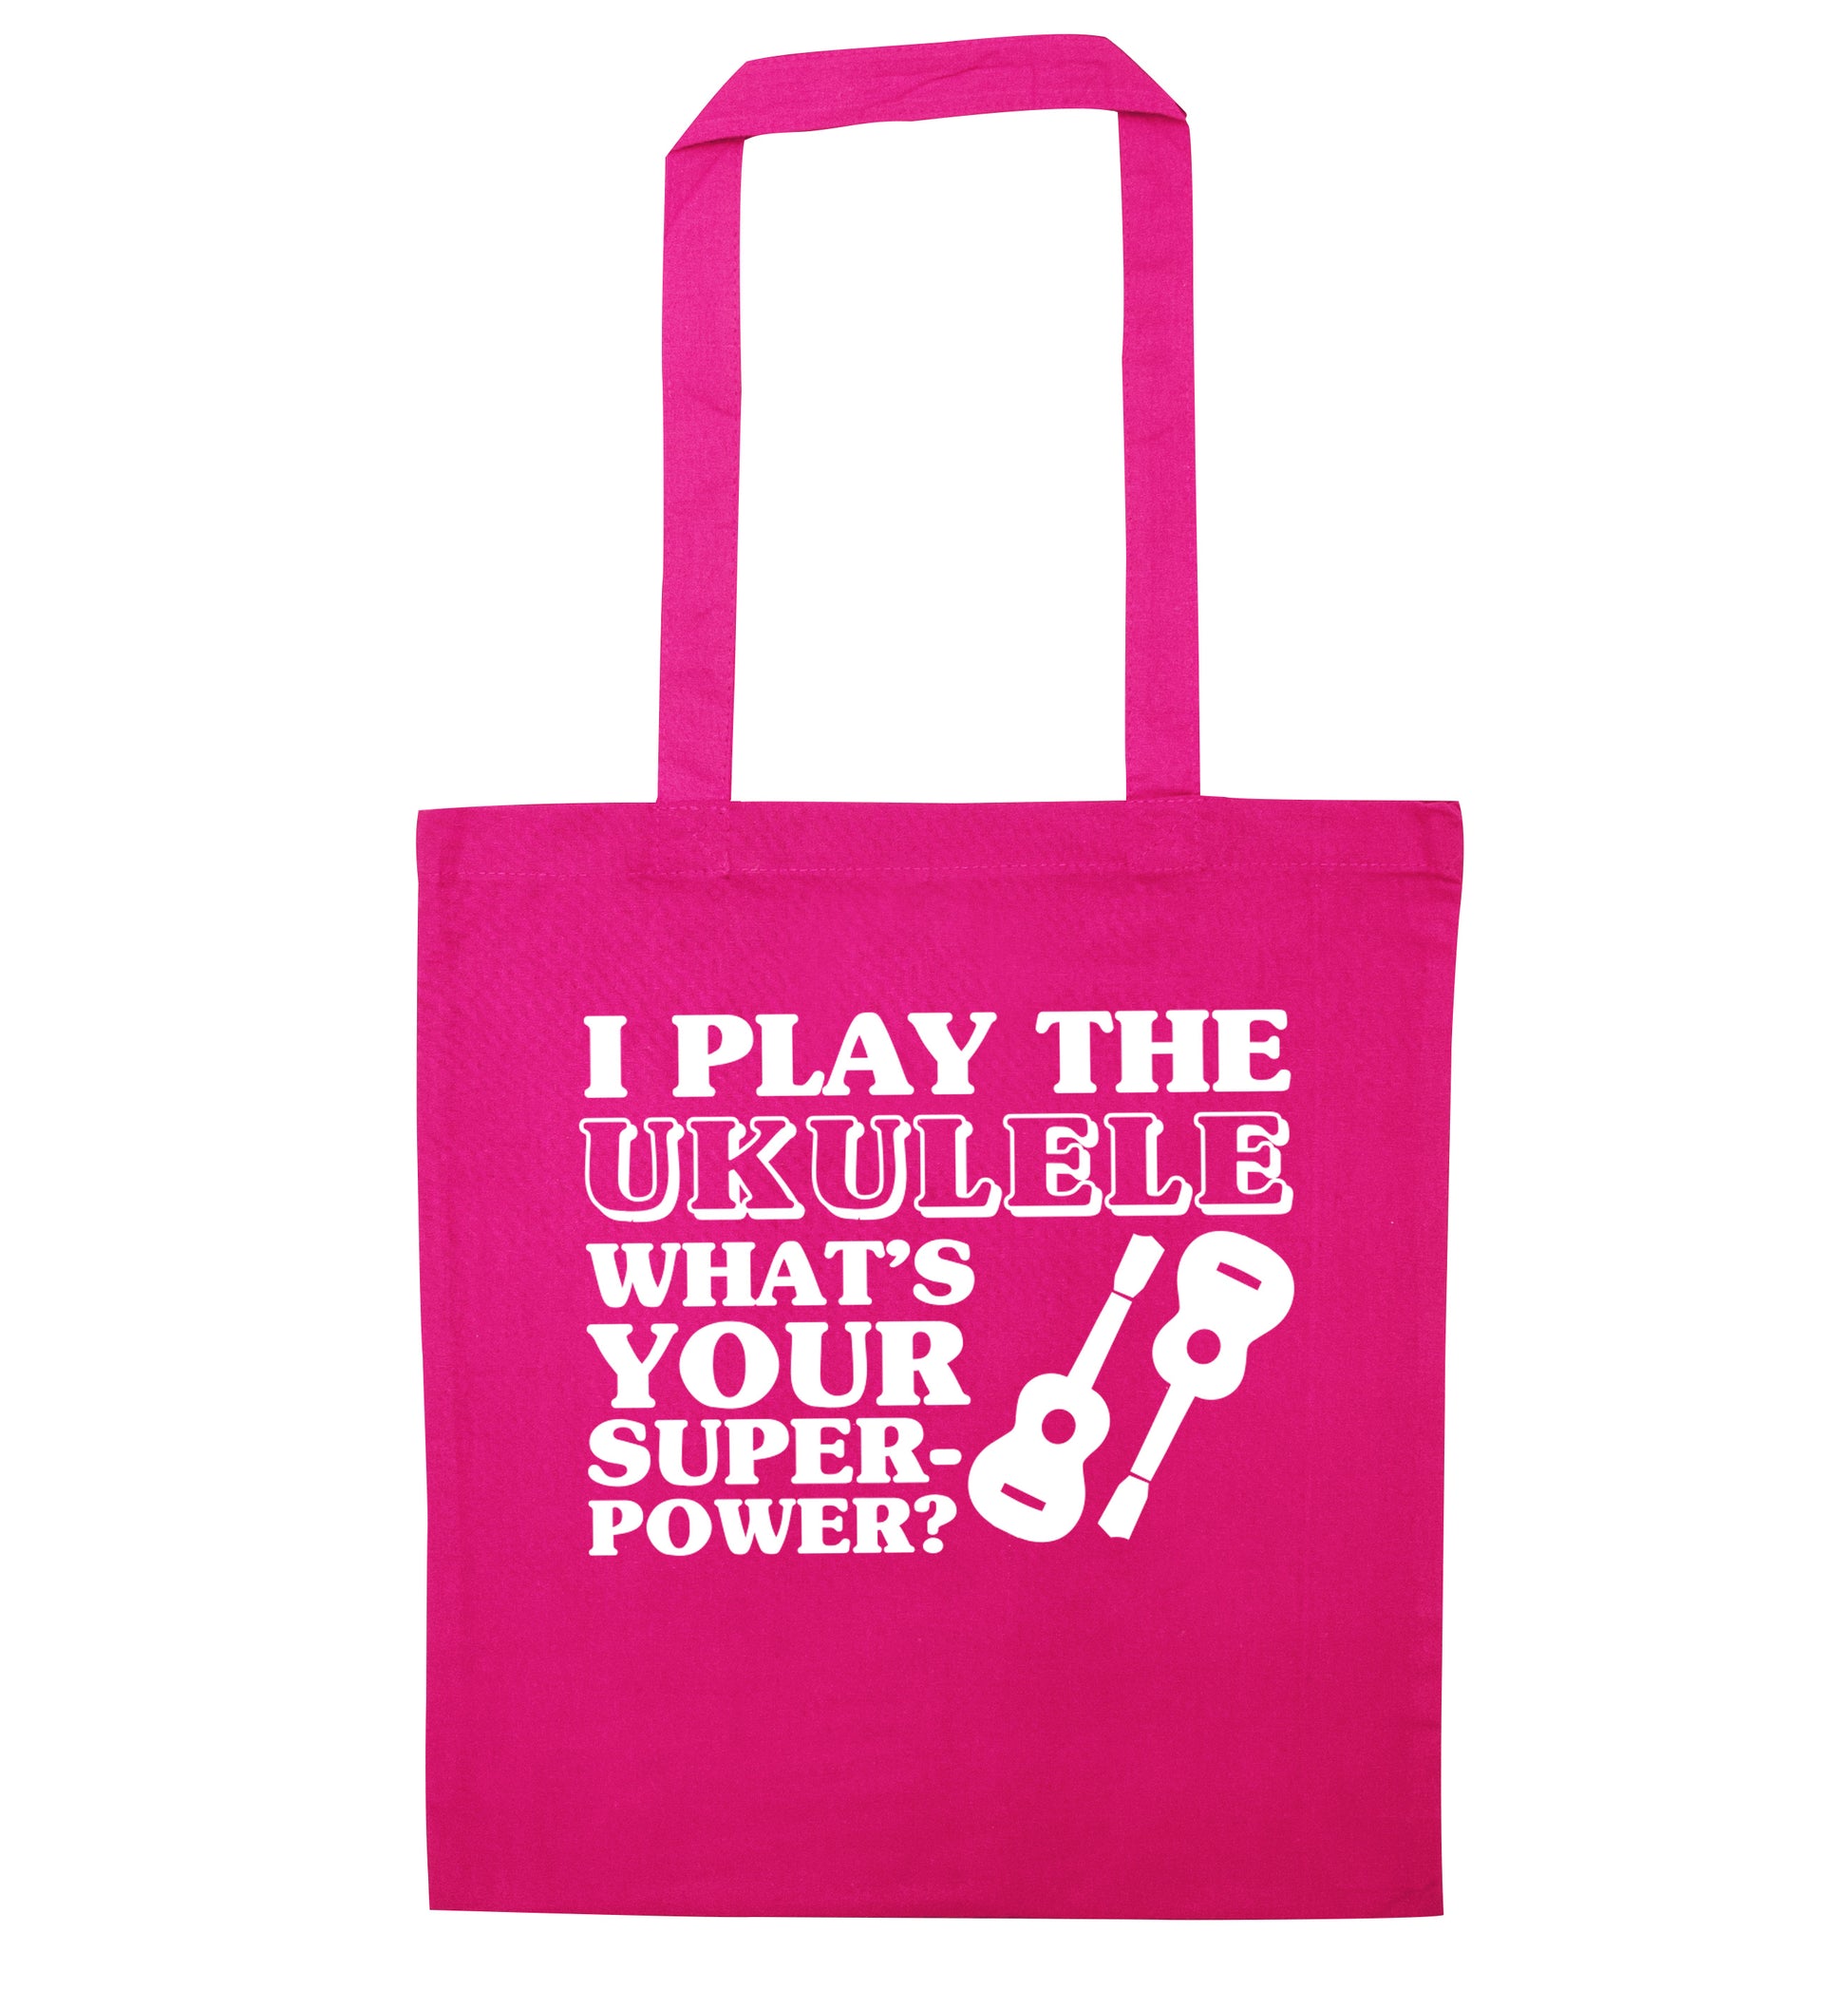 I play the ukulele what's your superpower? pink tote bag